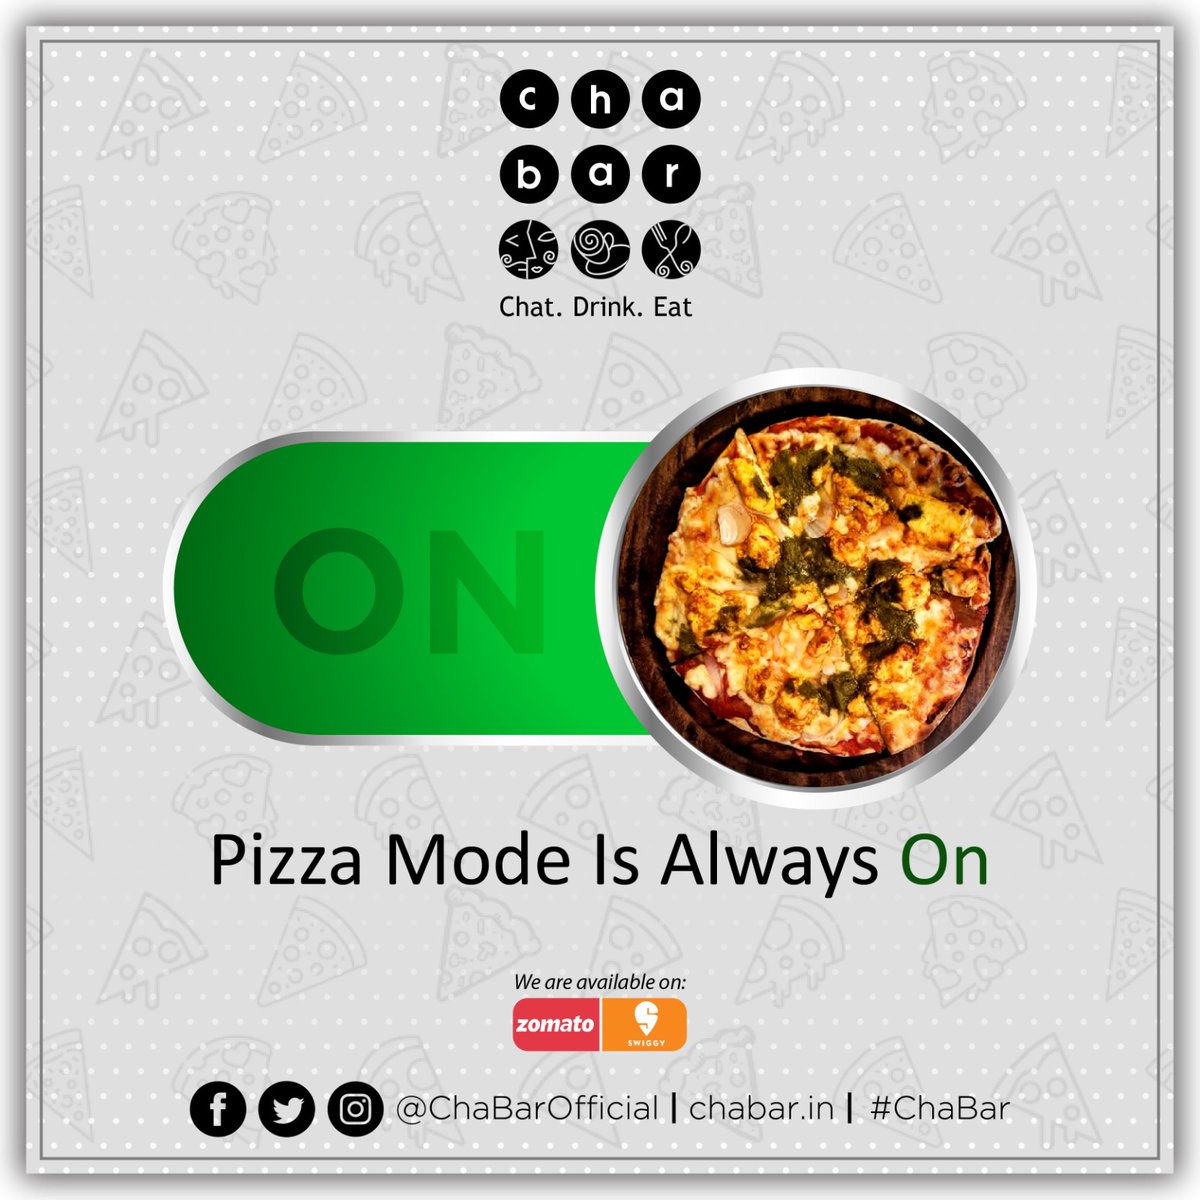 There's no such thing as 'too much pizza'. When pizza mode is always on, every meal is a party! 

🎉🍕 #PizzaLover #PizzaMode #Foodie #PizzaIsLife #FoodGoals #ChaBar